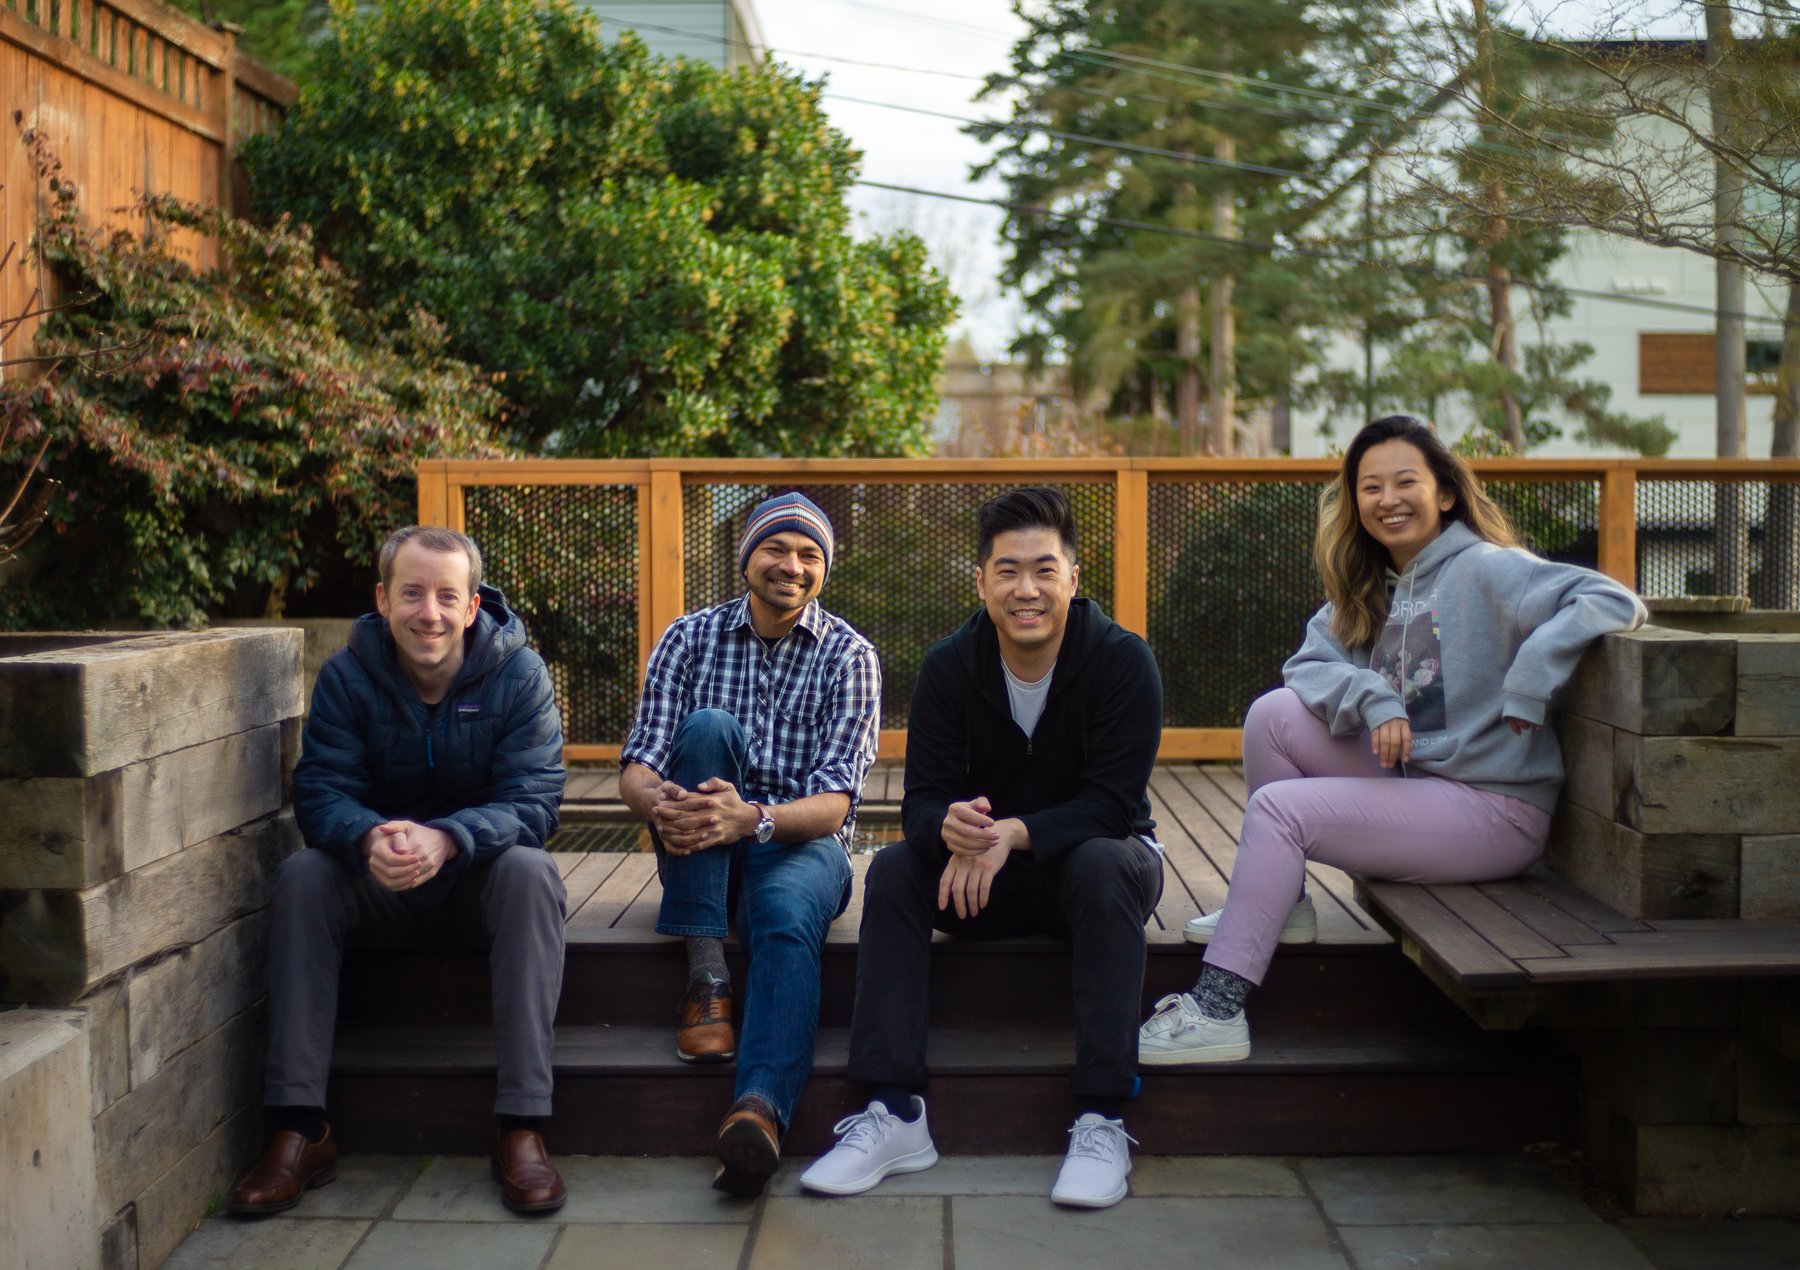 The Common Room founding team (from left to right) Tom Kleinpeter, Viraj Mody, Francis Luu, and Linda Lian